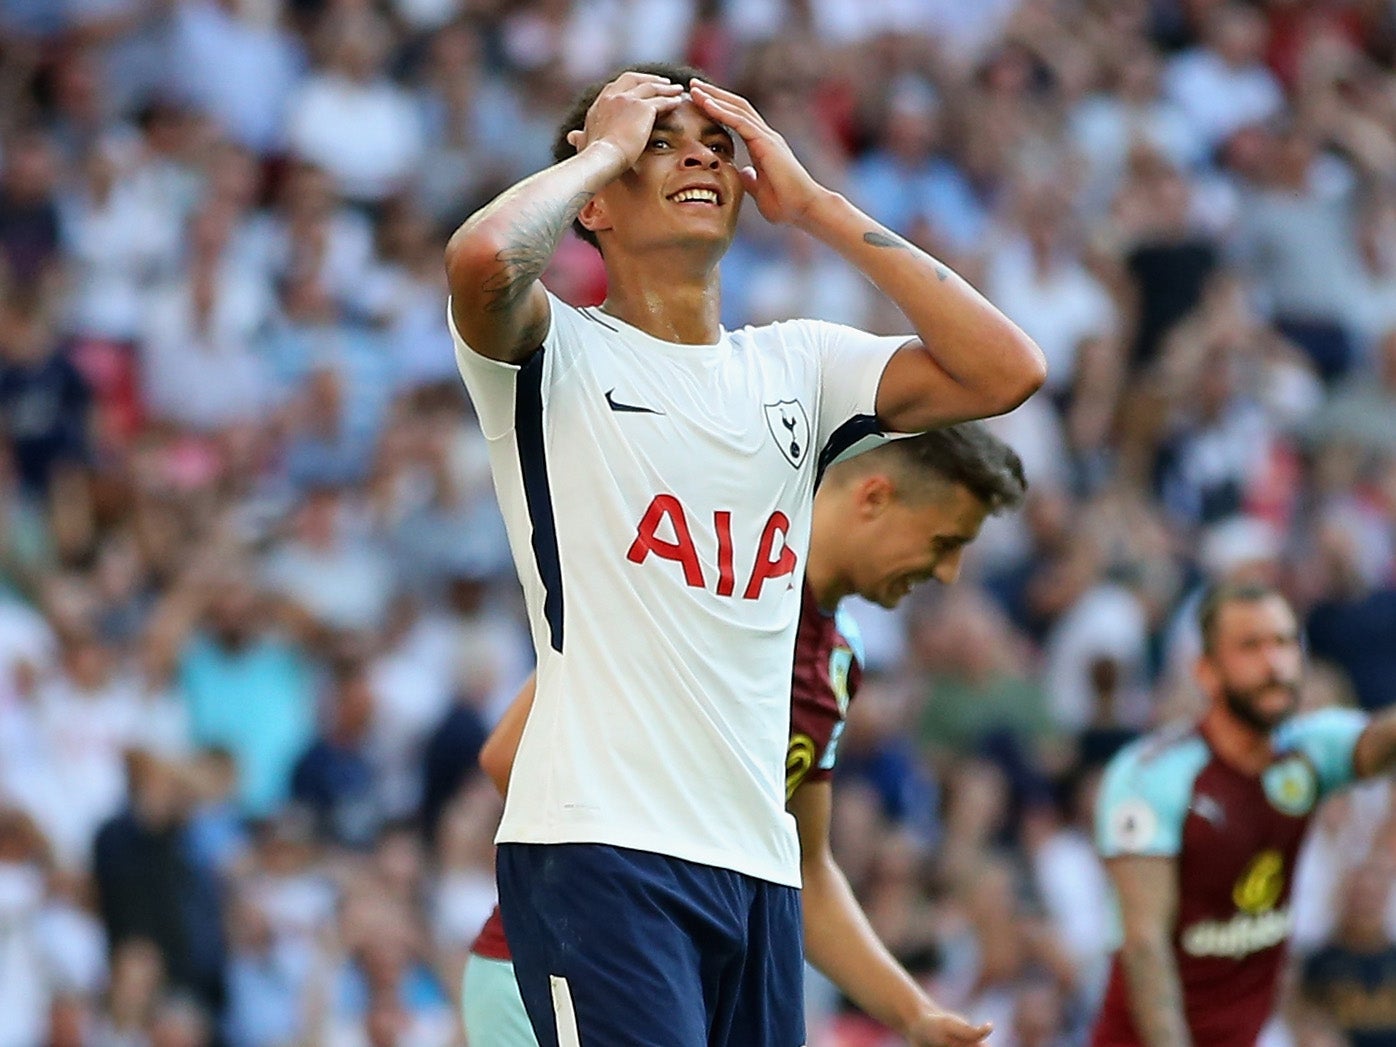 Alli scored the opener at Wembley on Sunday but Burnley snatched a late draw